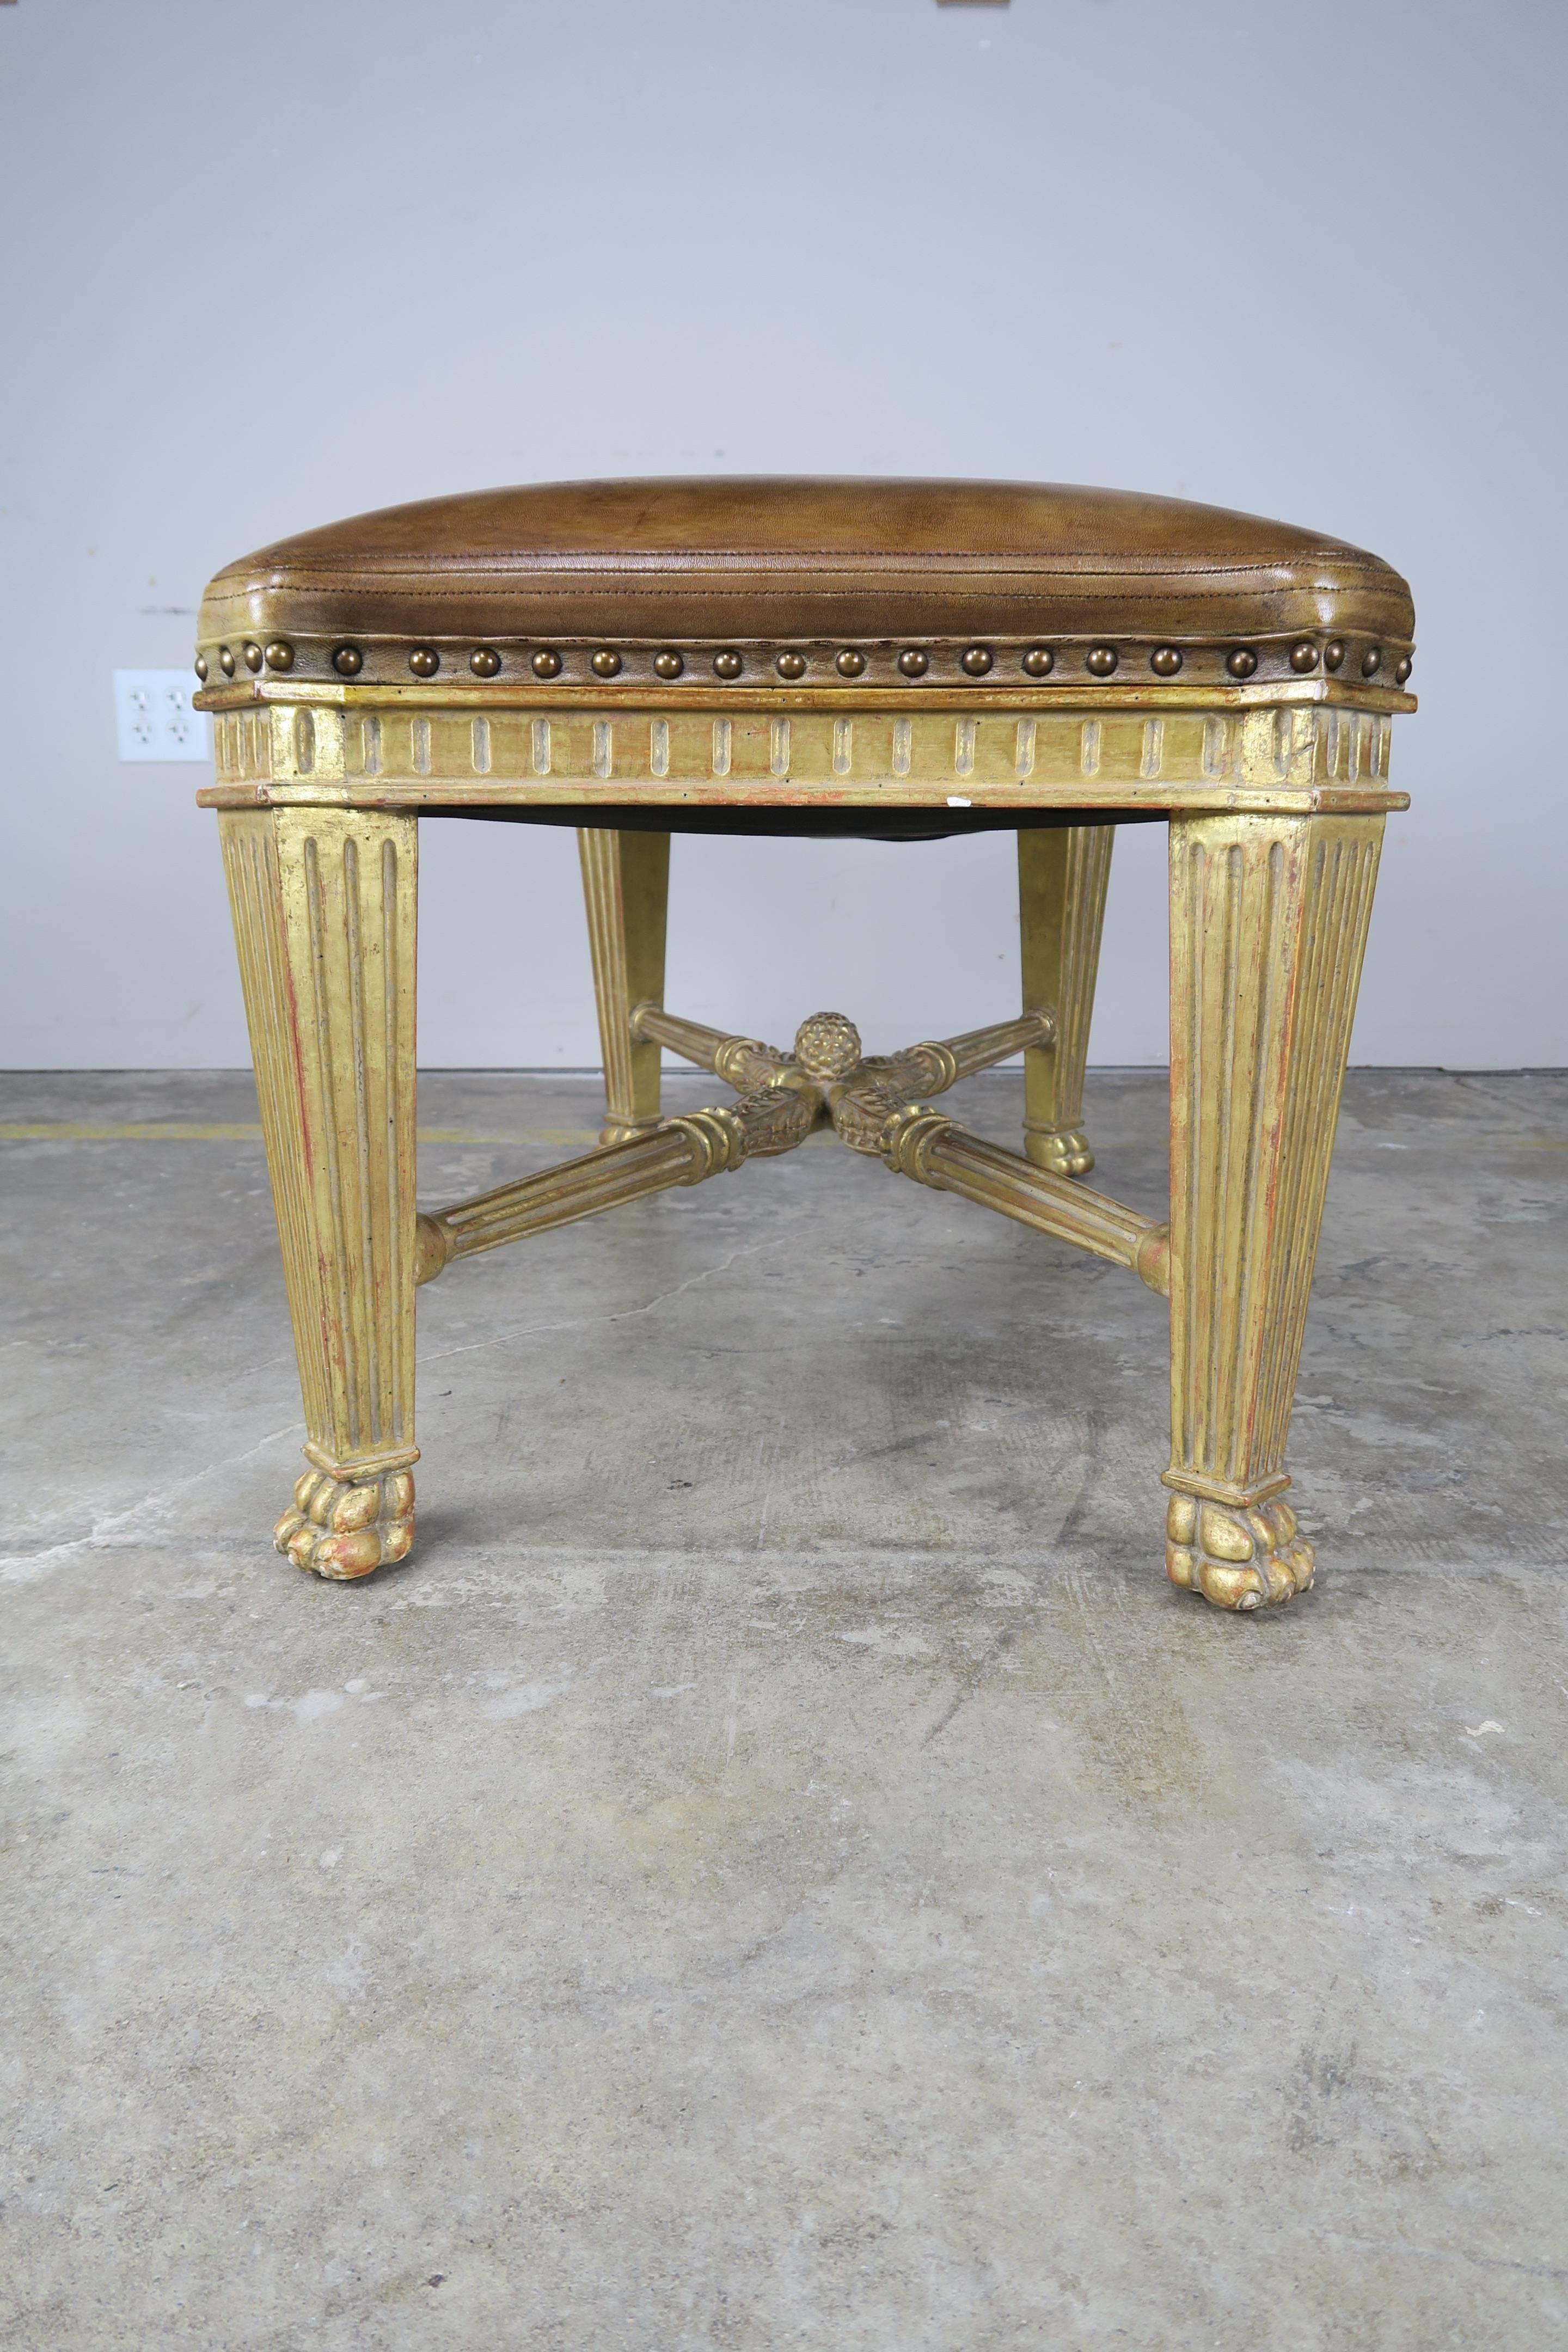 20th Century Leather Upholstered Gilt Wood Bench by Dennis & Leen